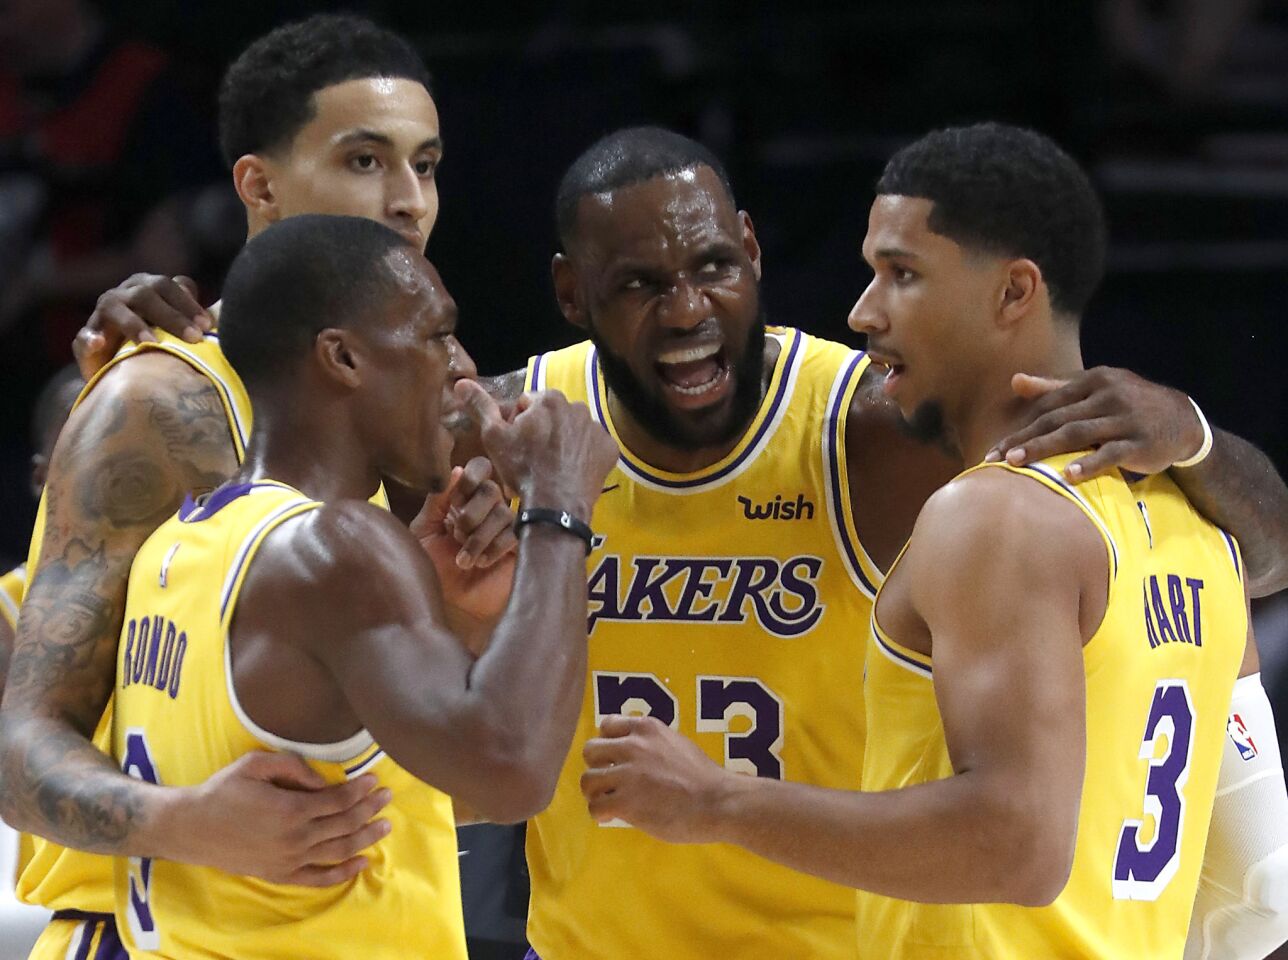 Lakers forward LeBron James huddles with his teammates during the season opener against the Trail Blazers.